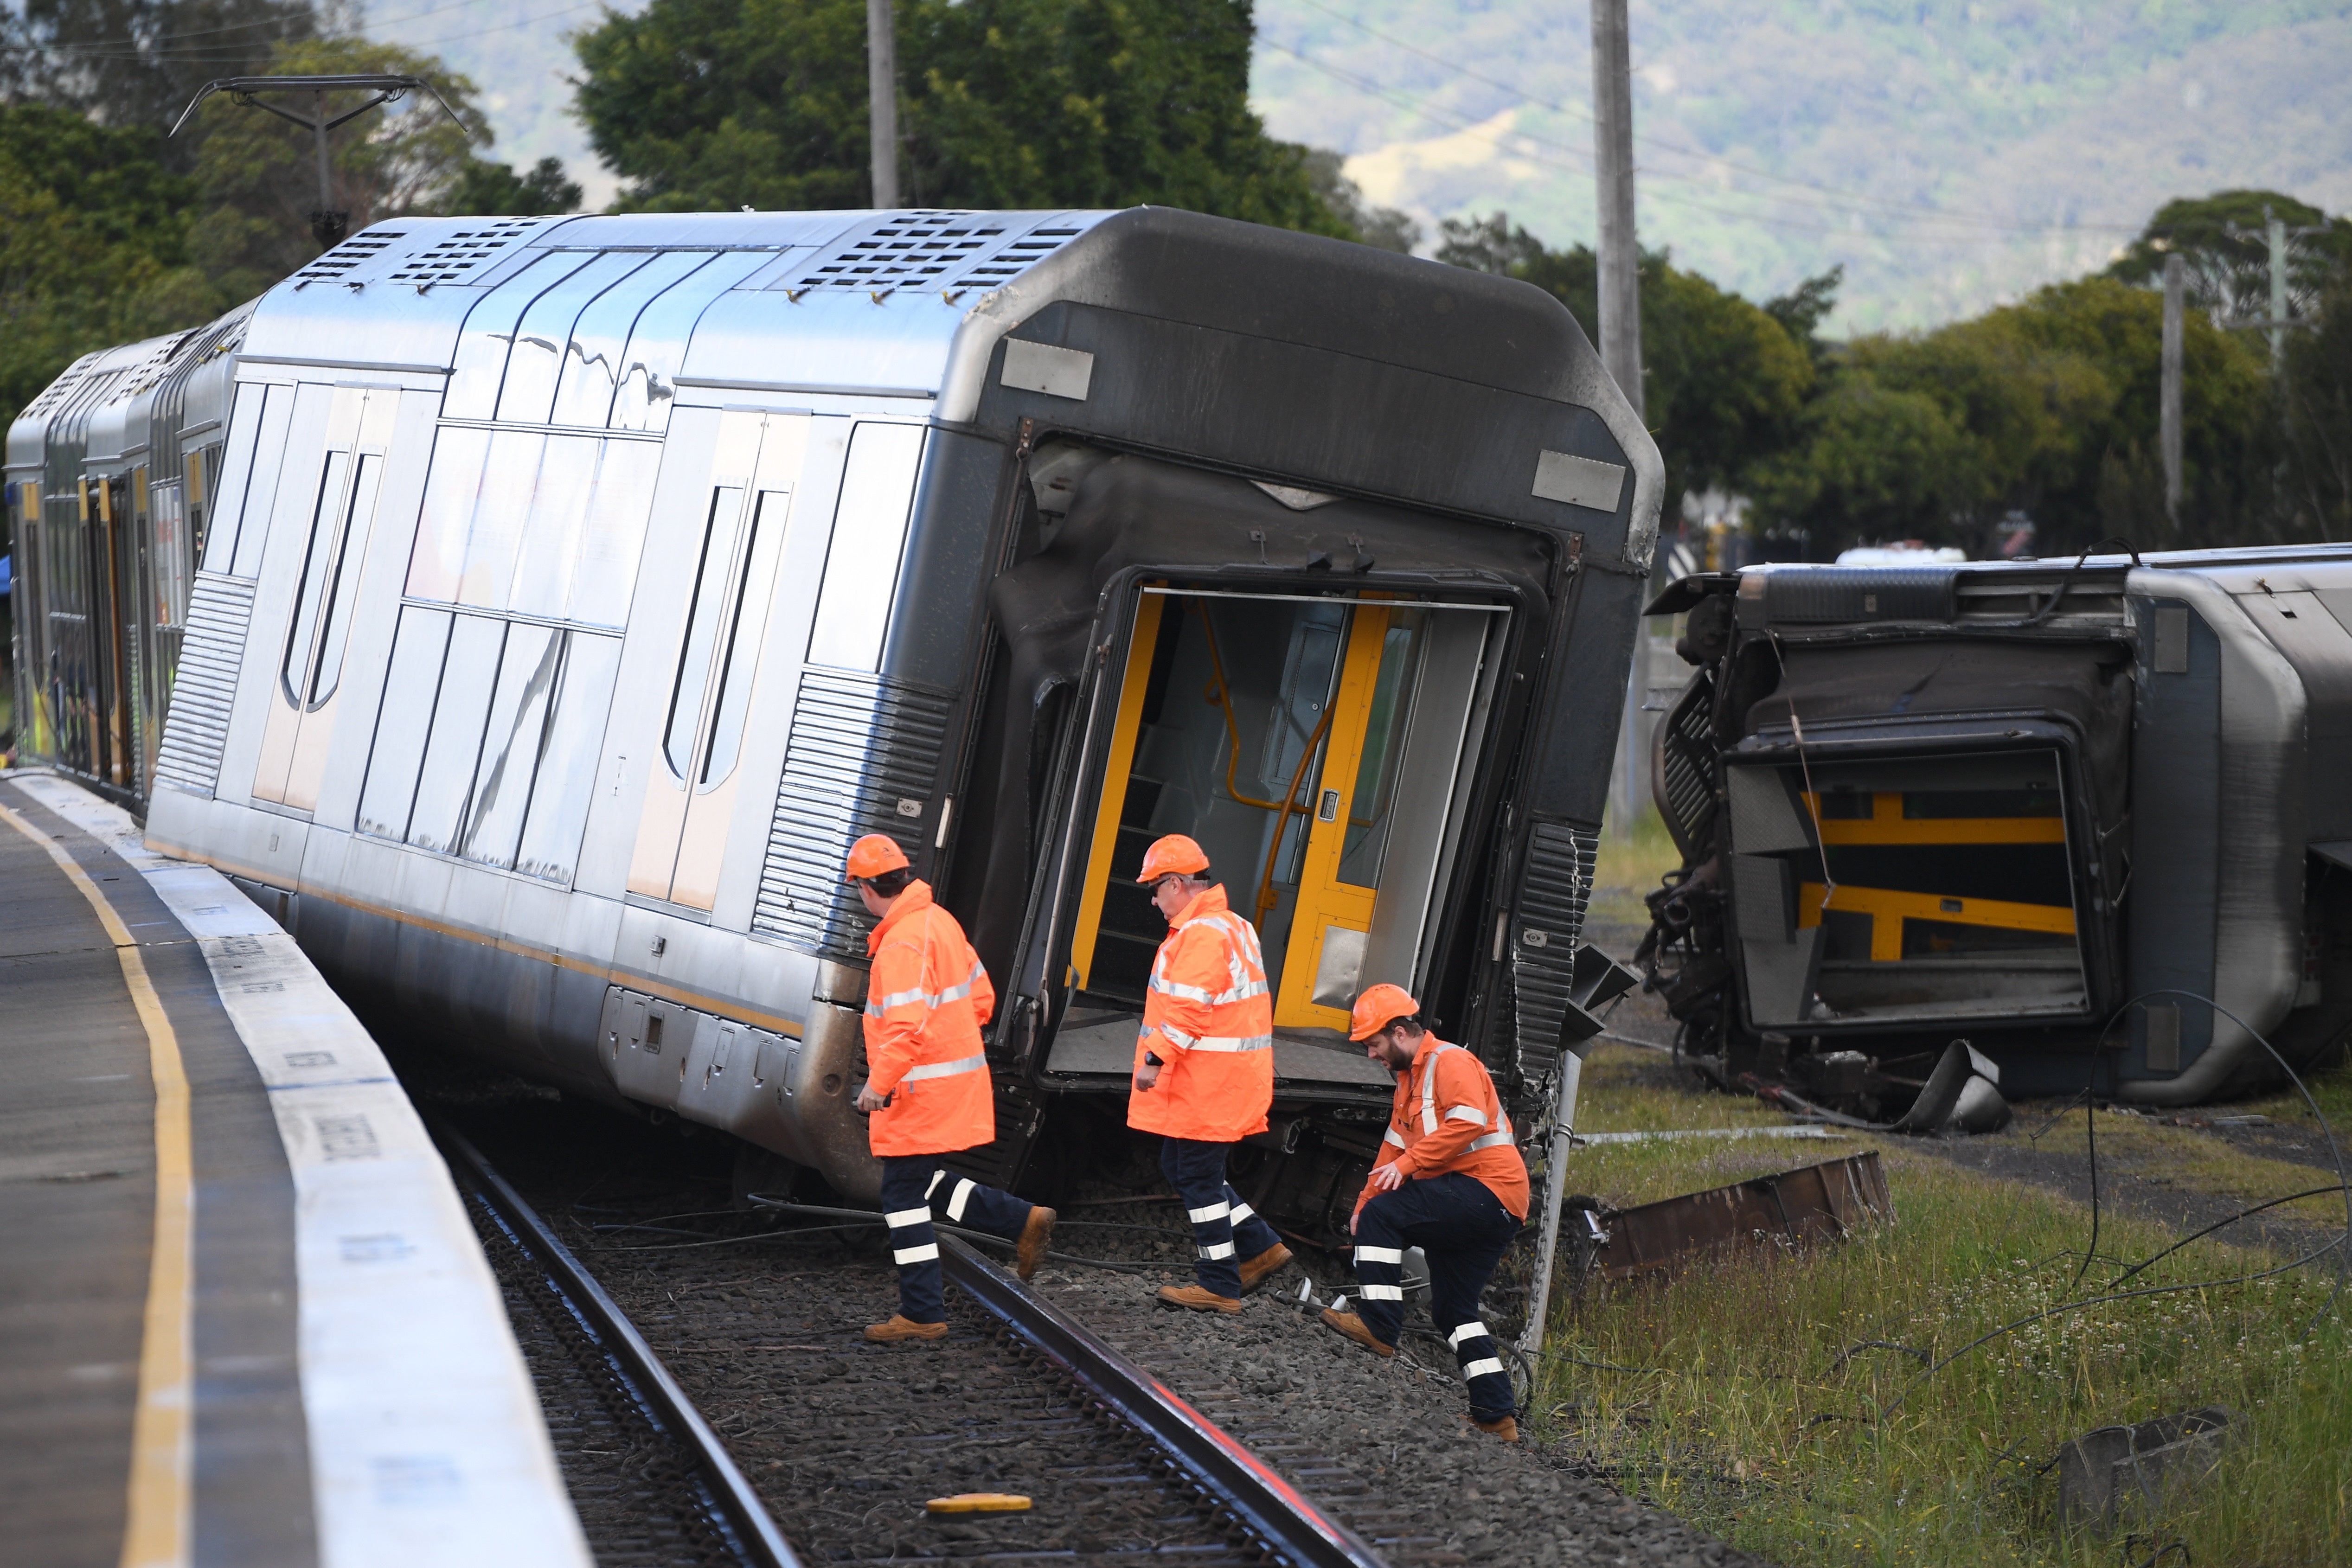 A derailed passenger train after it hit a car on a level crossing in Kembla Grange, New South Wales, Australia